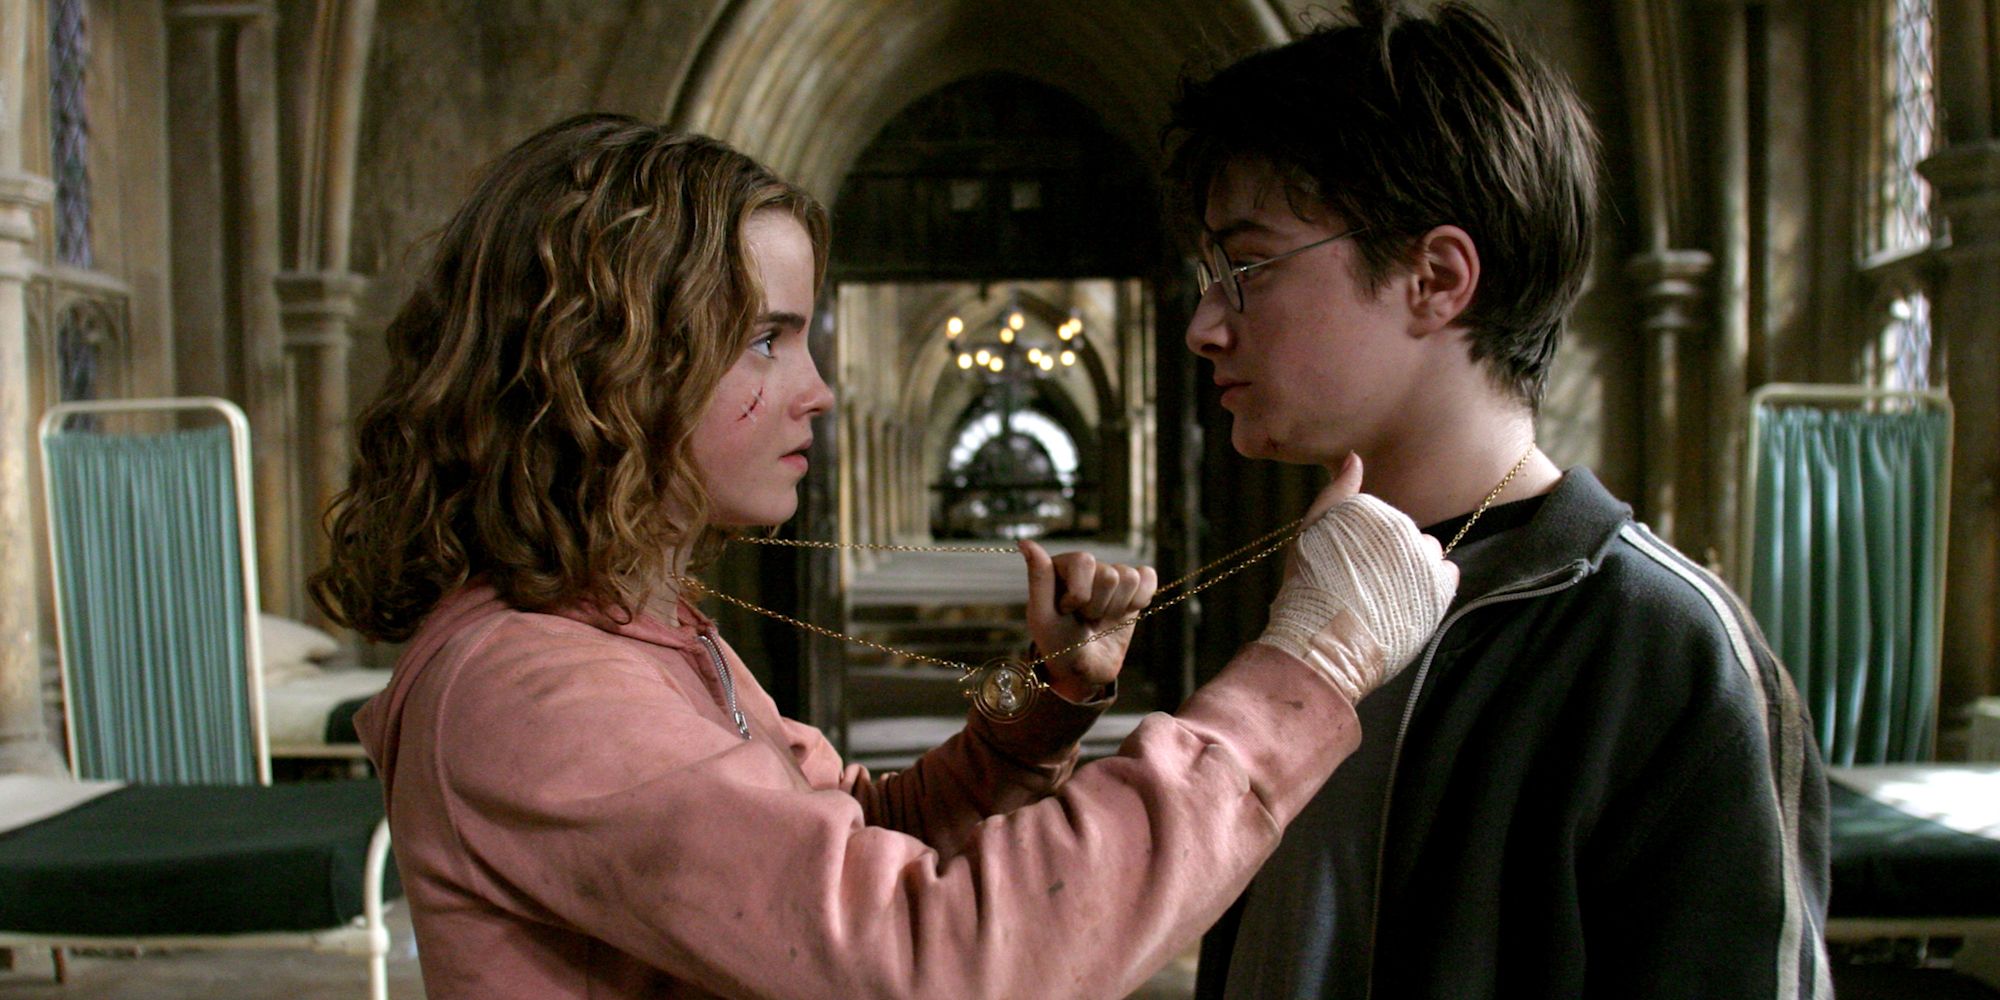 Hermione and Harry (Emma Watson and Daniel Radcliffe) use the Time-Turner in Harry Potter and the Prisoner of Azkaban